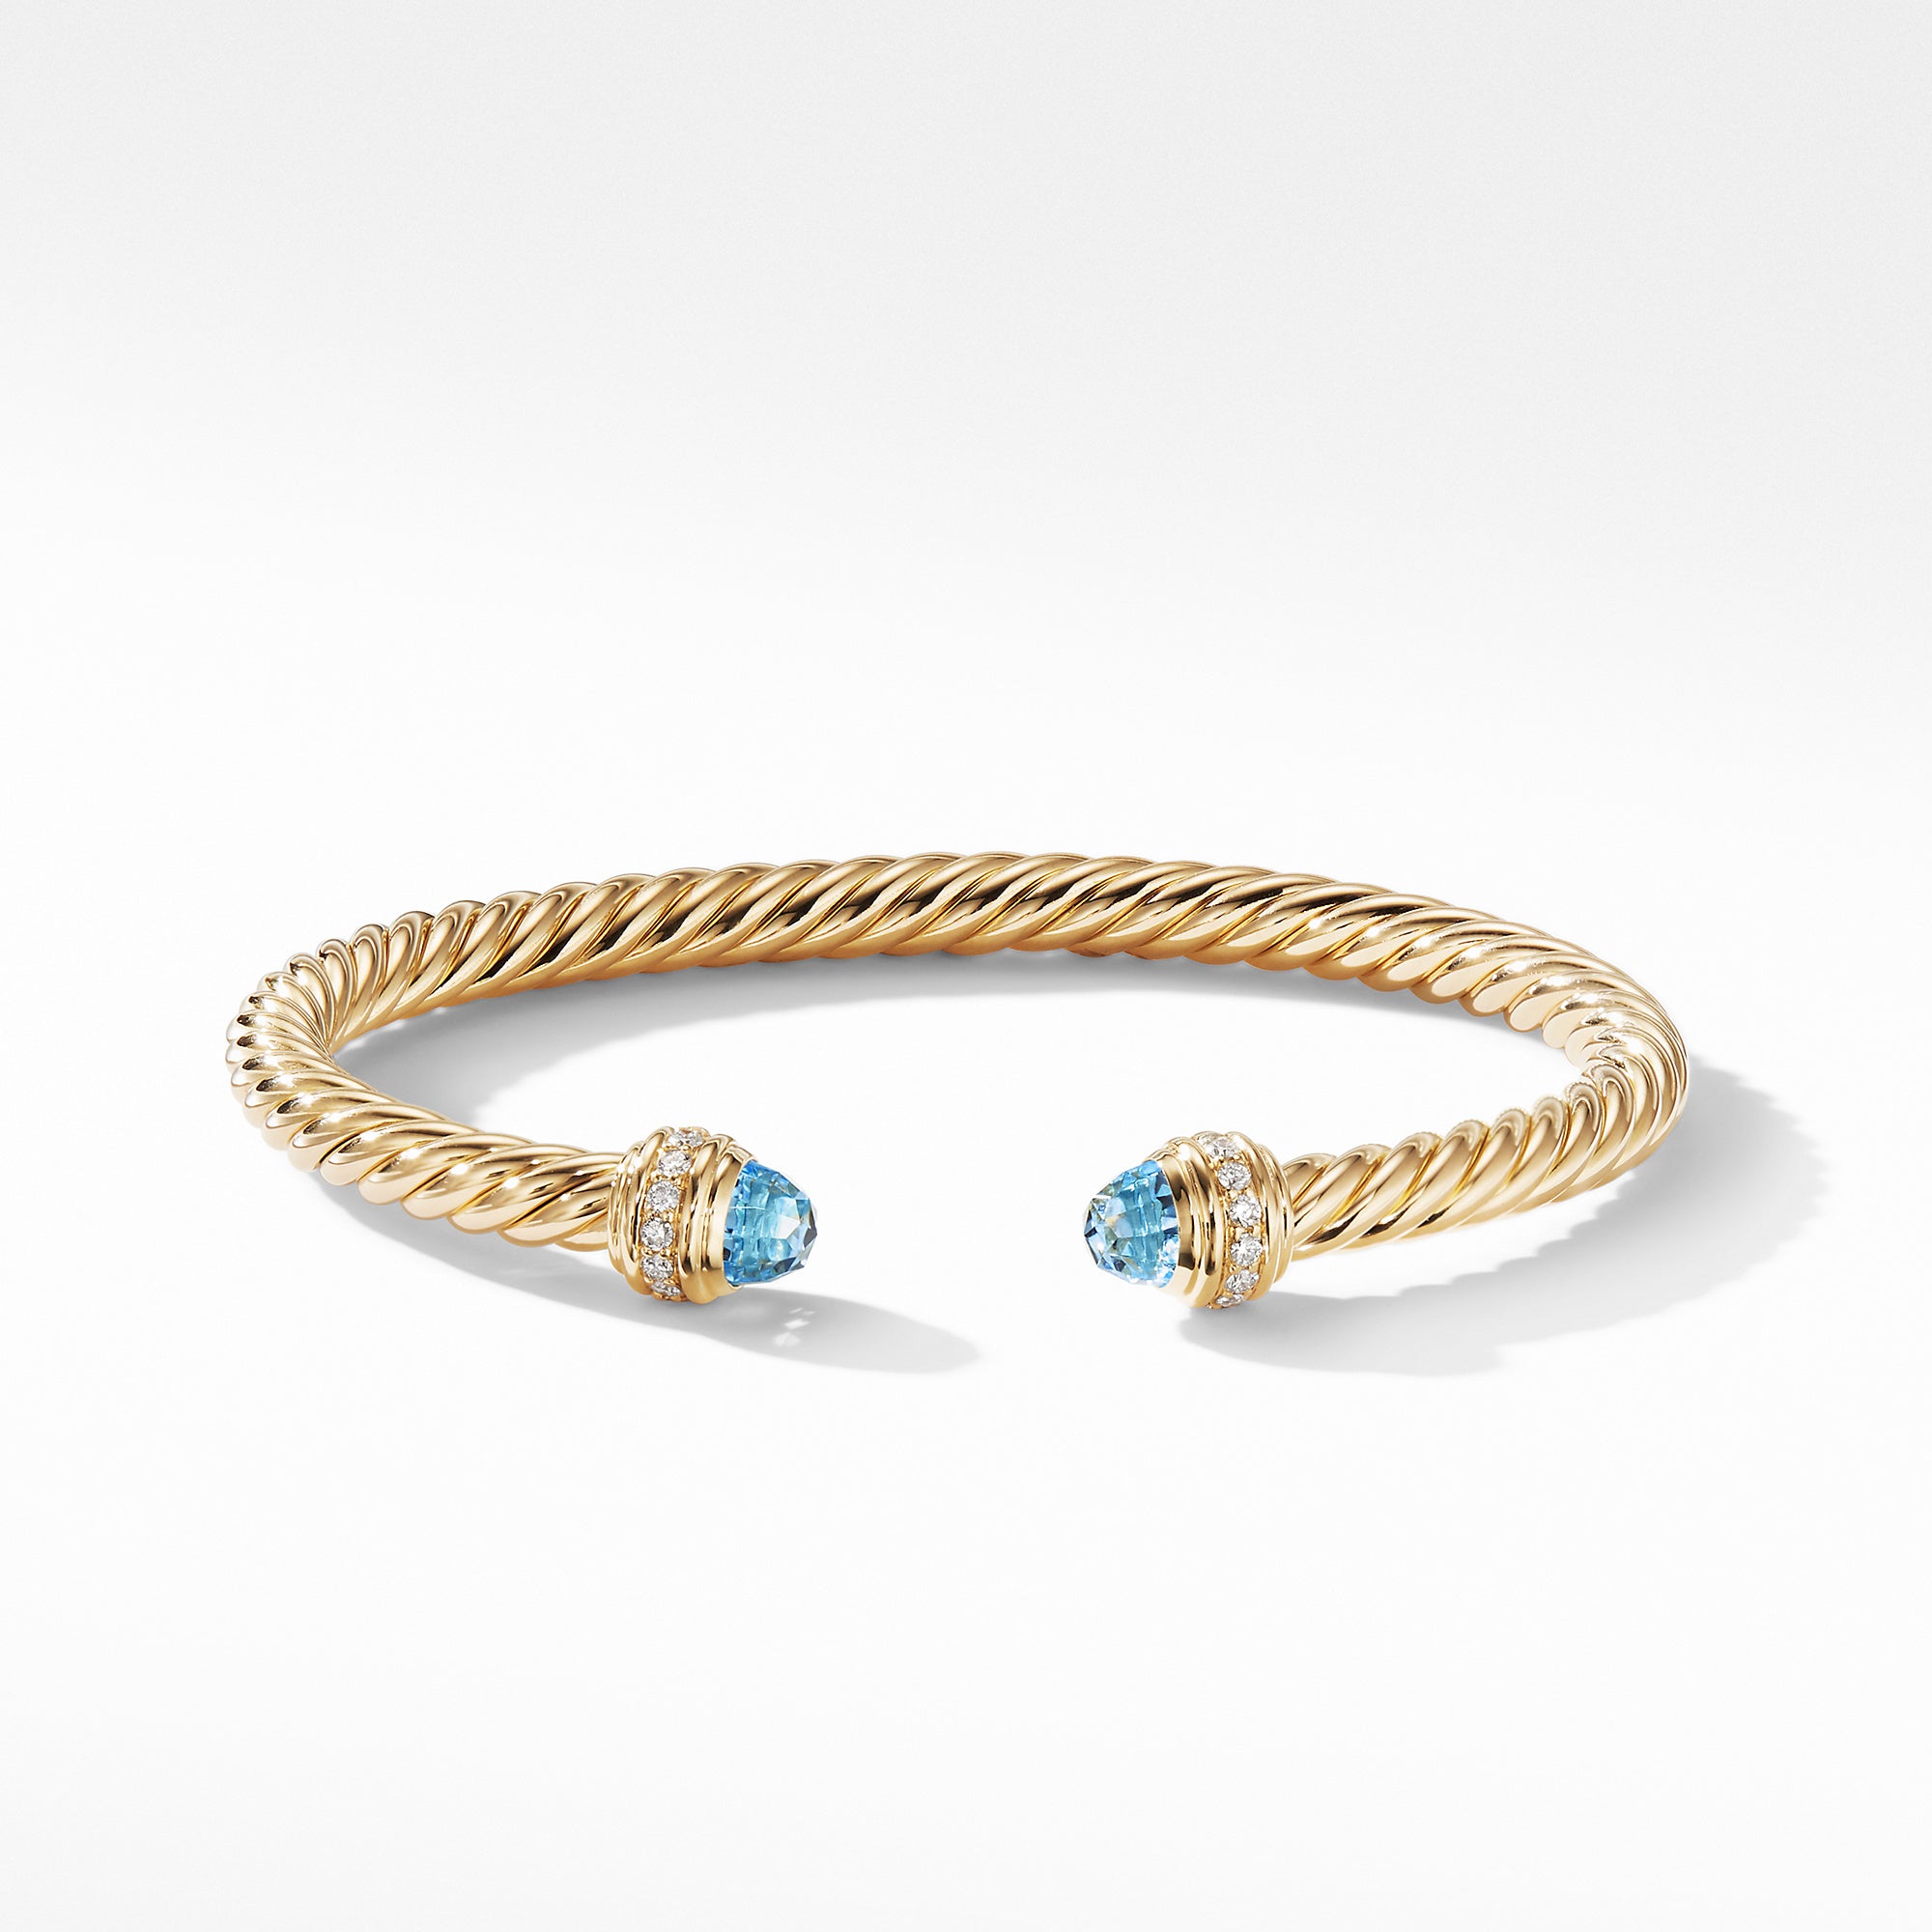 David Yurman 5MM Cable Bracelet in 18K Gold with Blue Topaz and Diamon ...